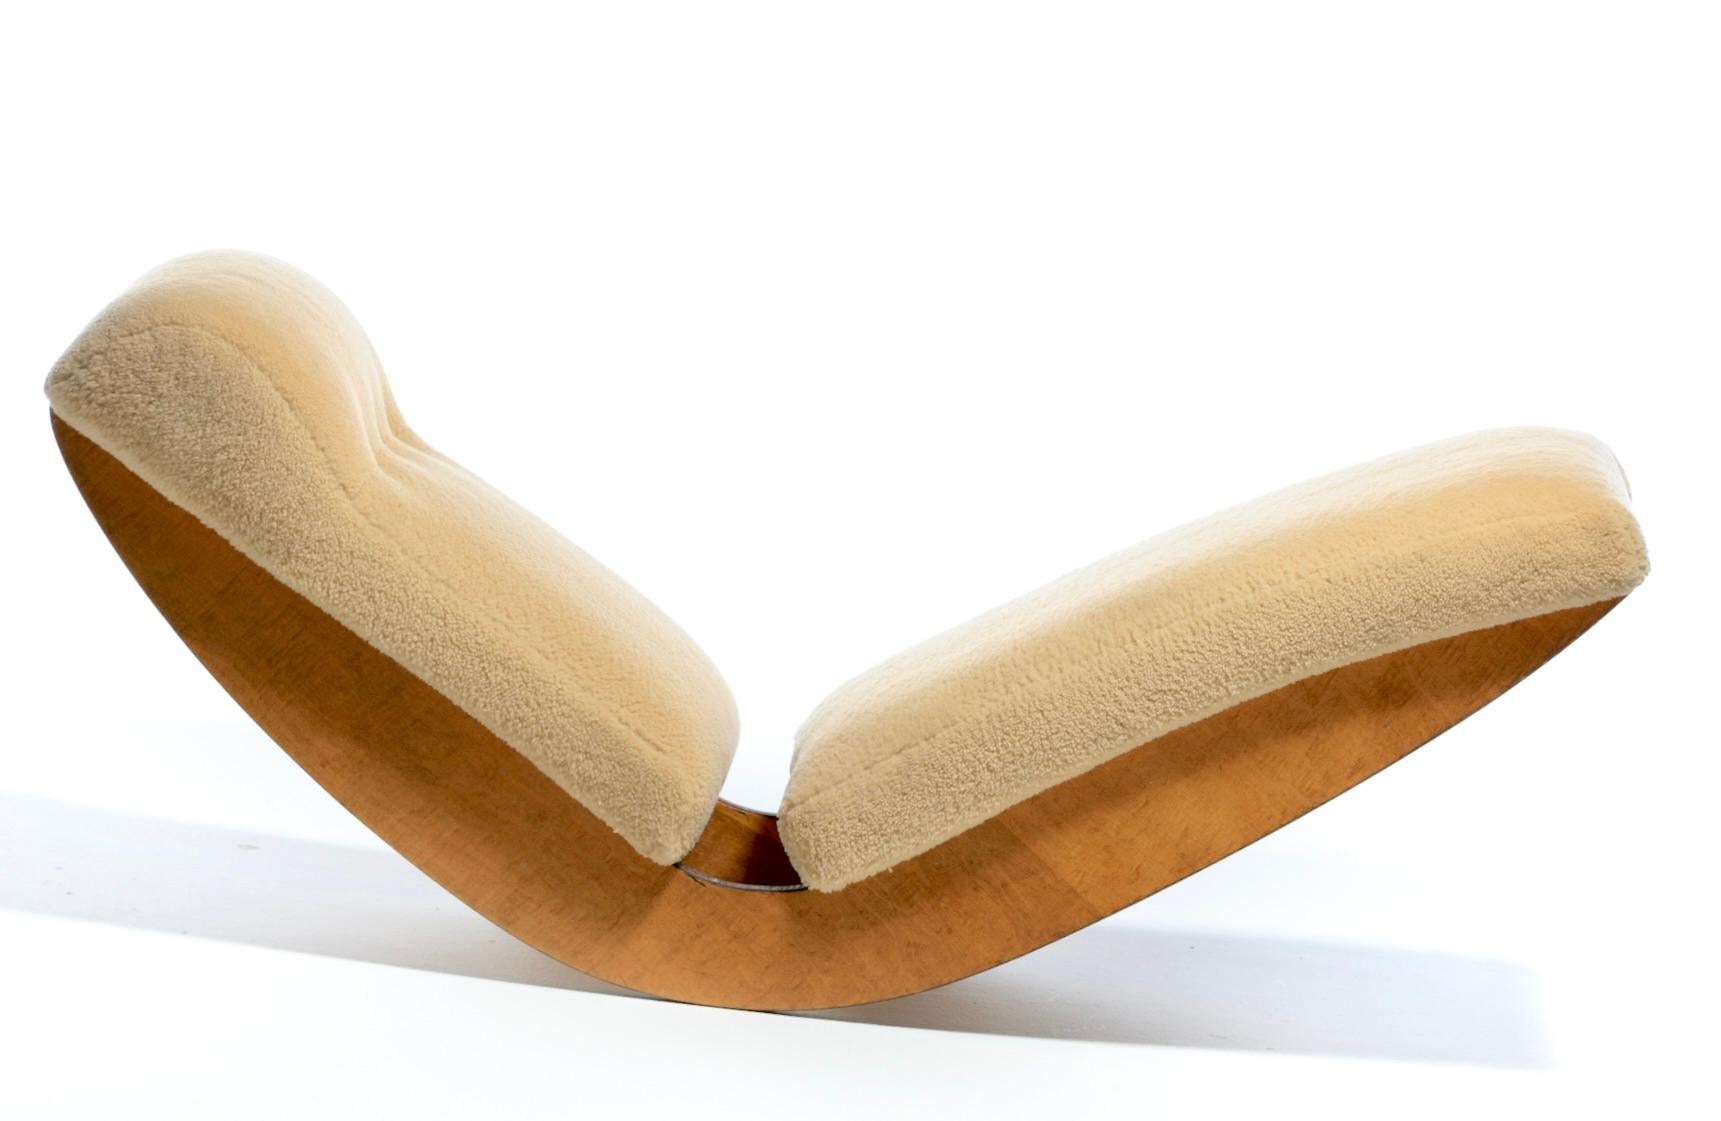 Organic Modern Sculptural Walnut Rocking Chaise Lounge in Soft Butterscotch Shearling c. 1980 For Sale